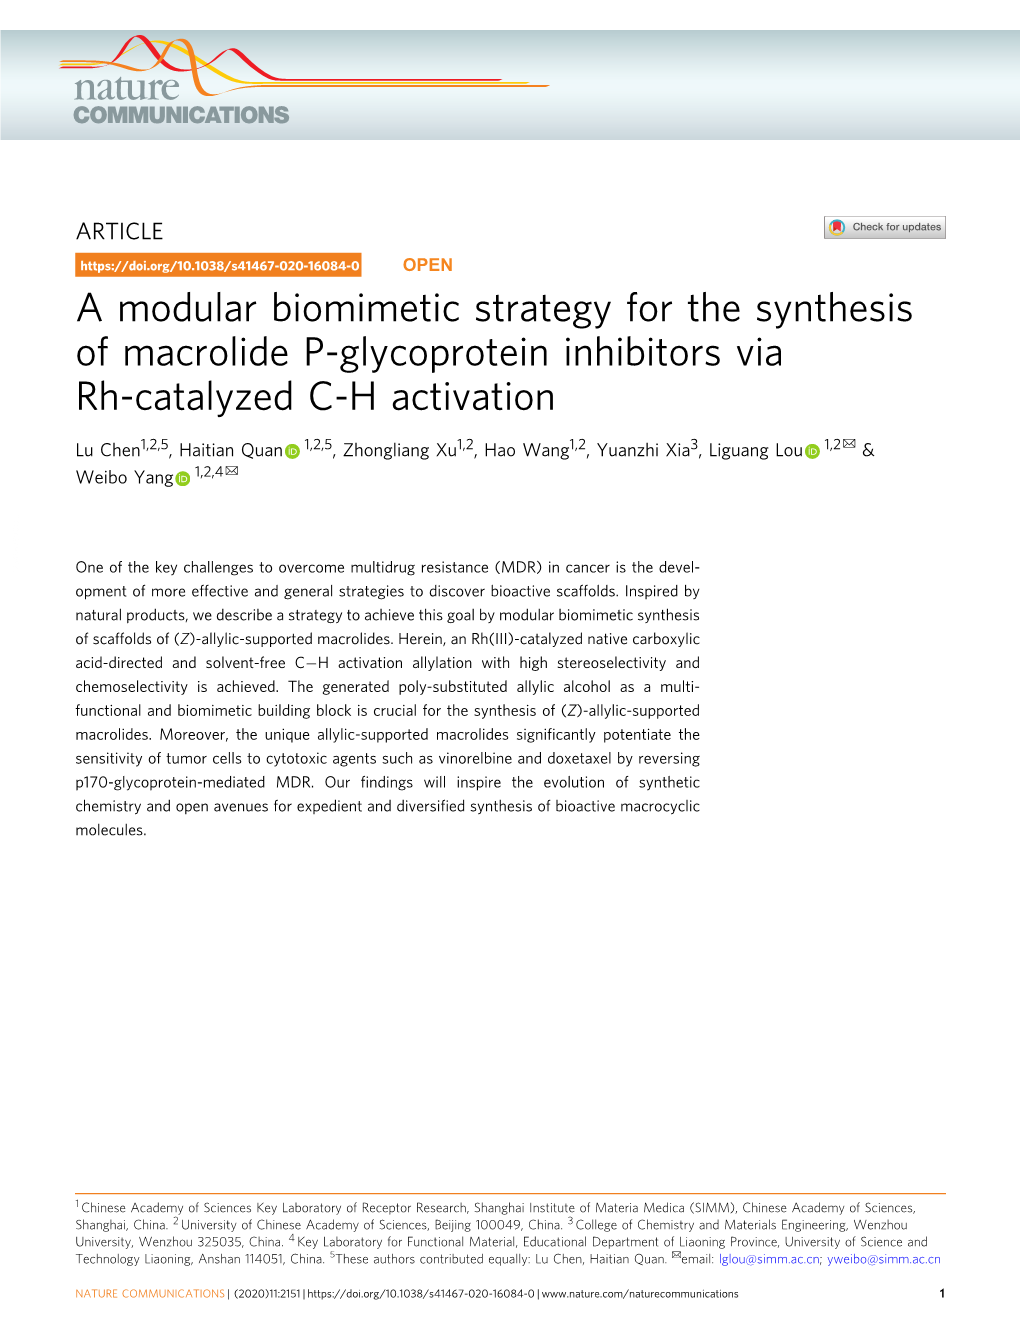 A Modular Biomimetic Strategy for the Synthesis of Macrolide P